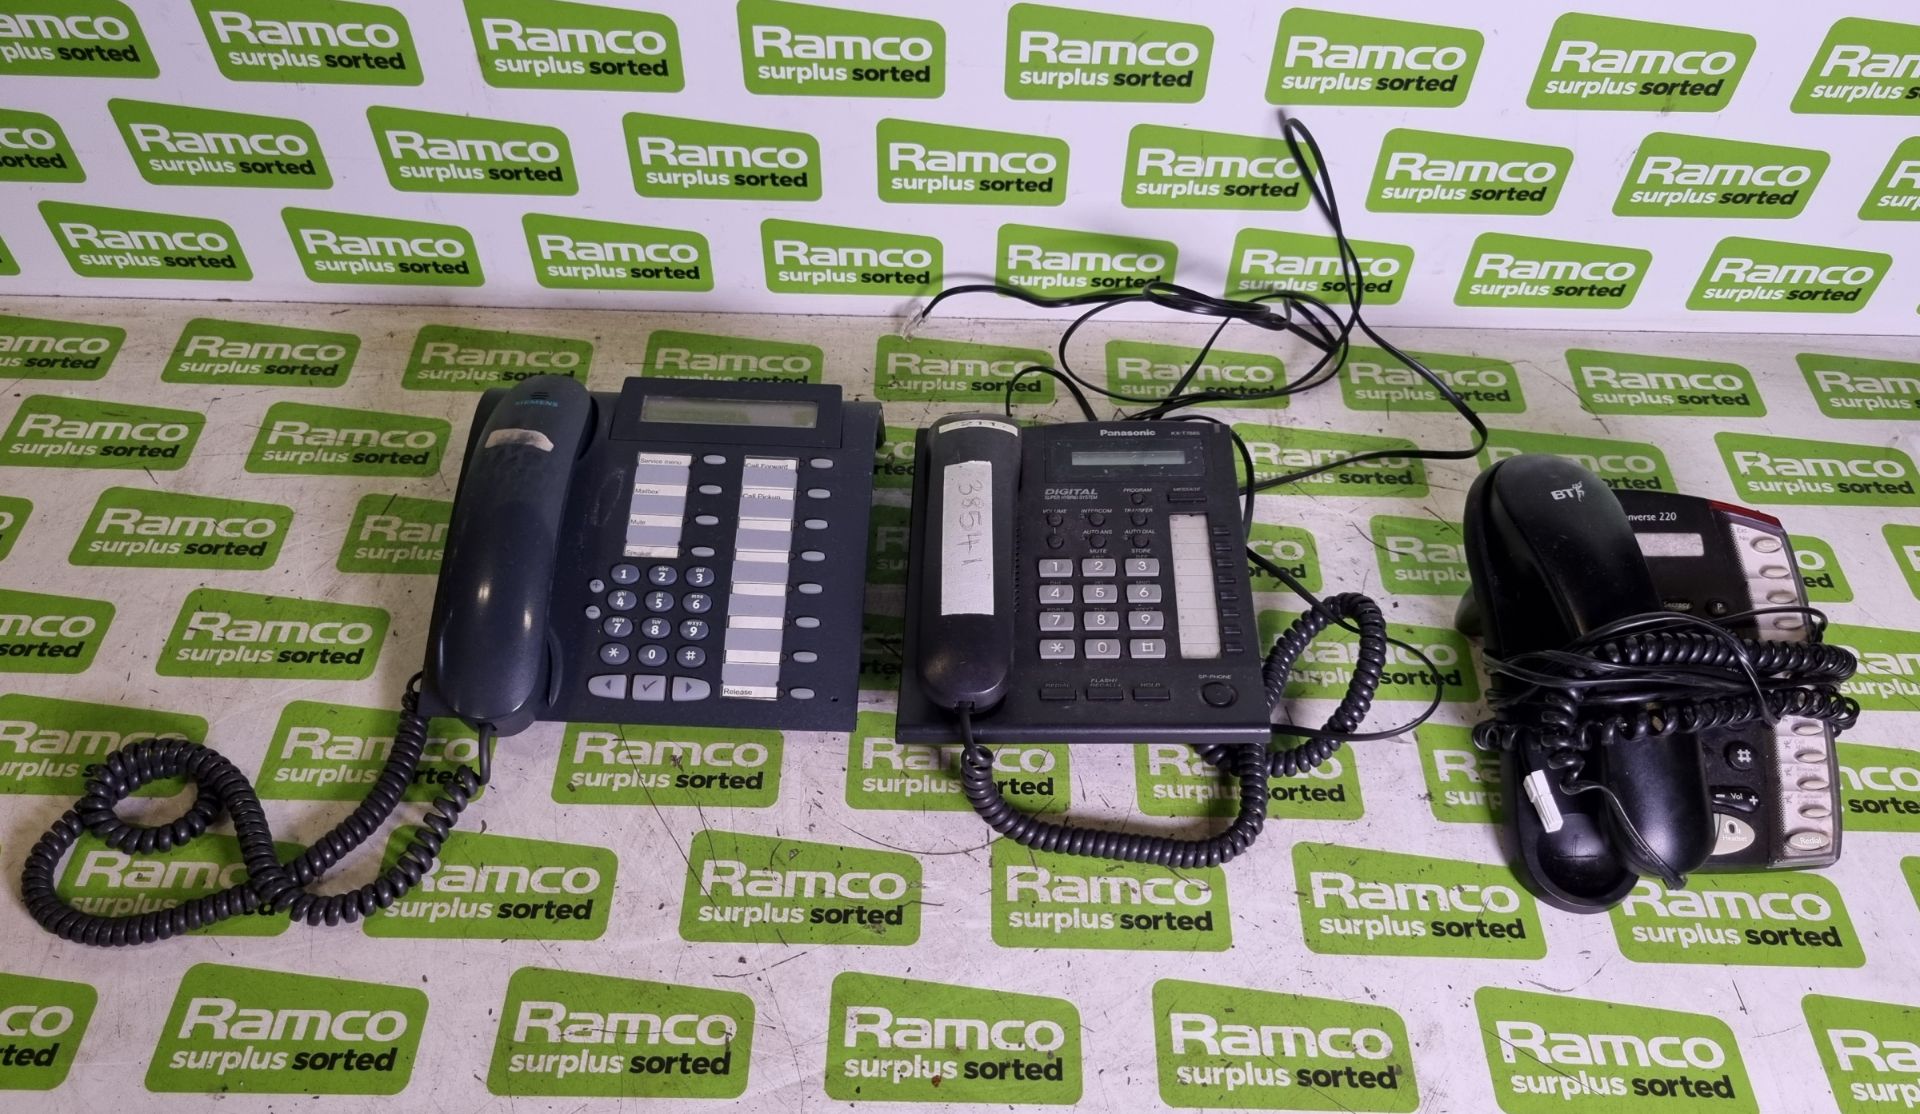 33x Siemens OptiPoint 410 Standard manganese (colour) office phones - W 220 x D 220 x H 105mm - Image 2 of 6